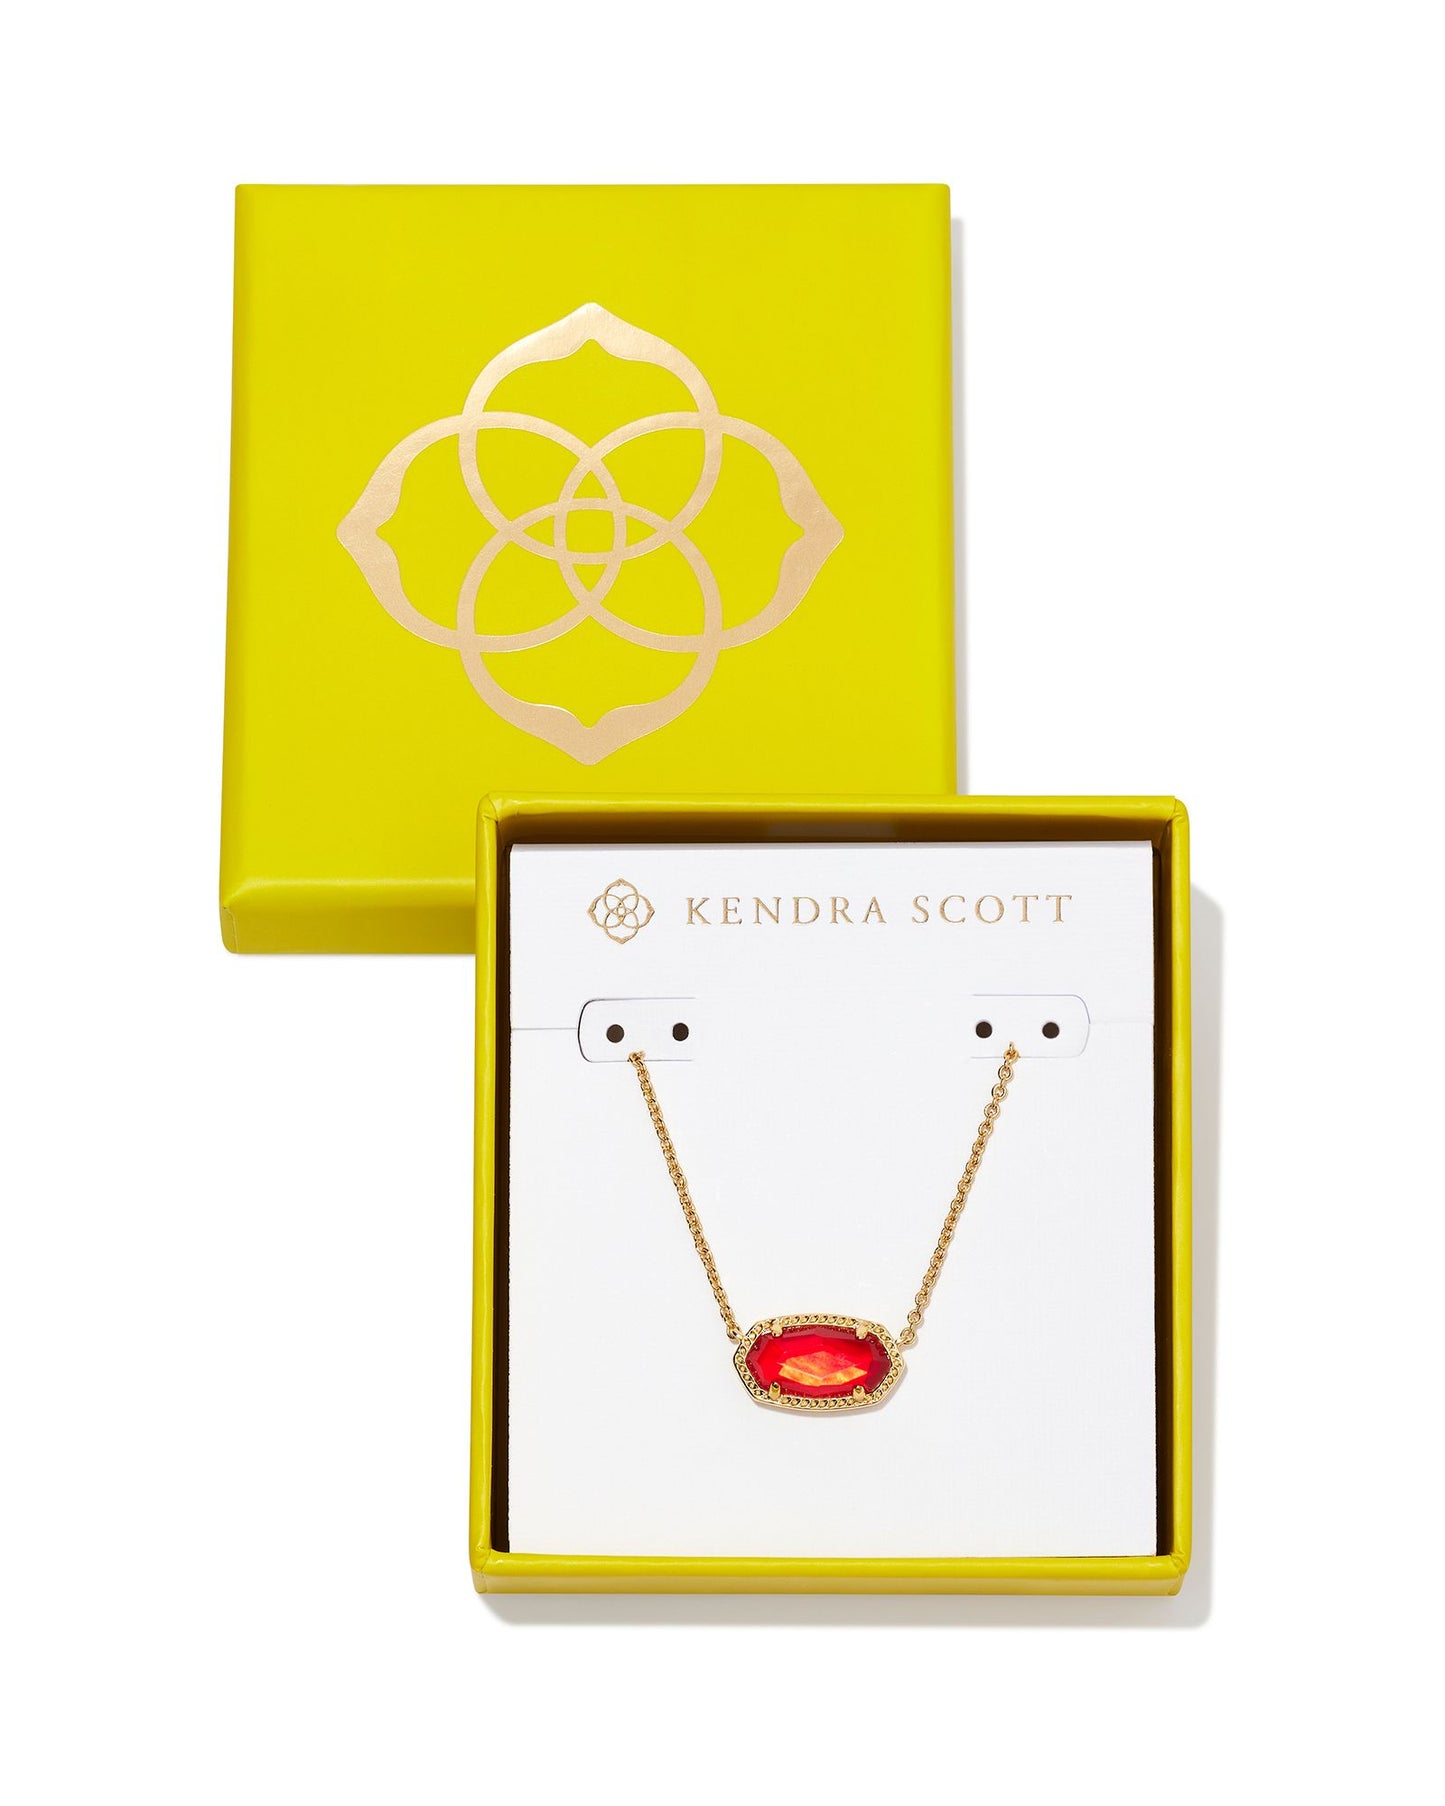 Kendra Scott Elisa Pendant Necklace Boxed Gold Red Illusion-Jewelry Set-Kendra Scott-G00014GLD-The Twisted Chandelier